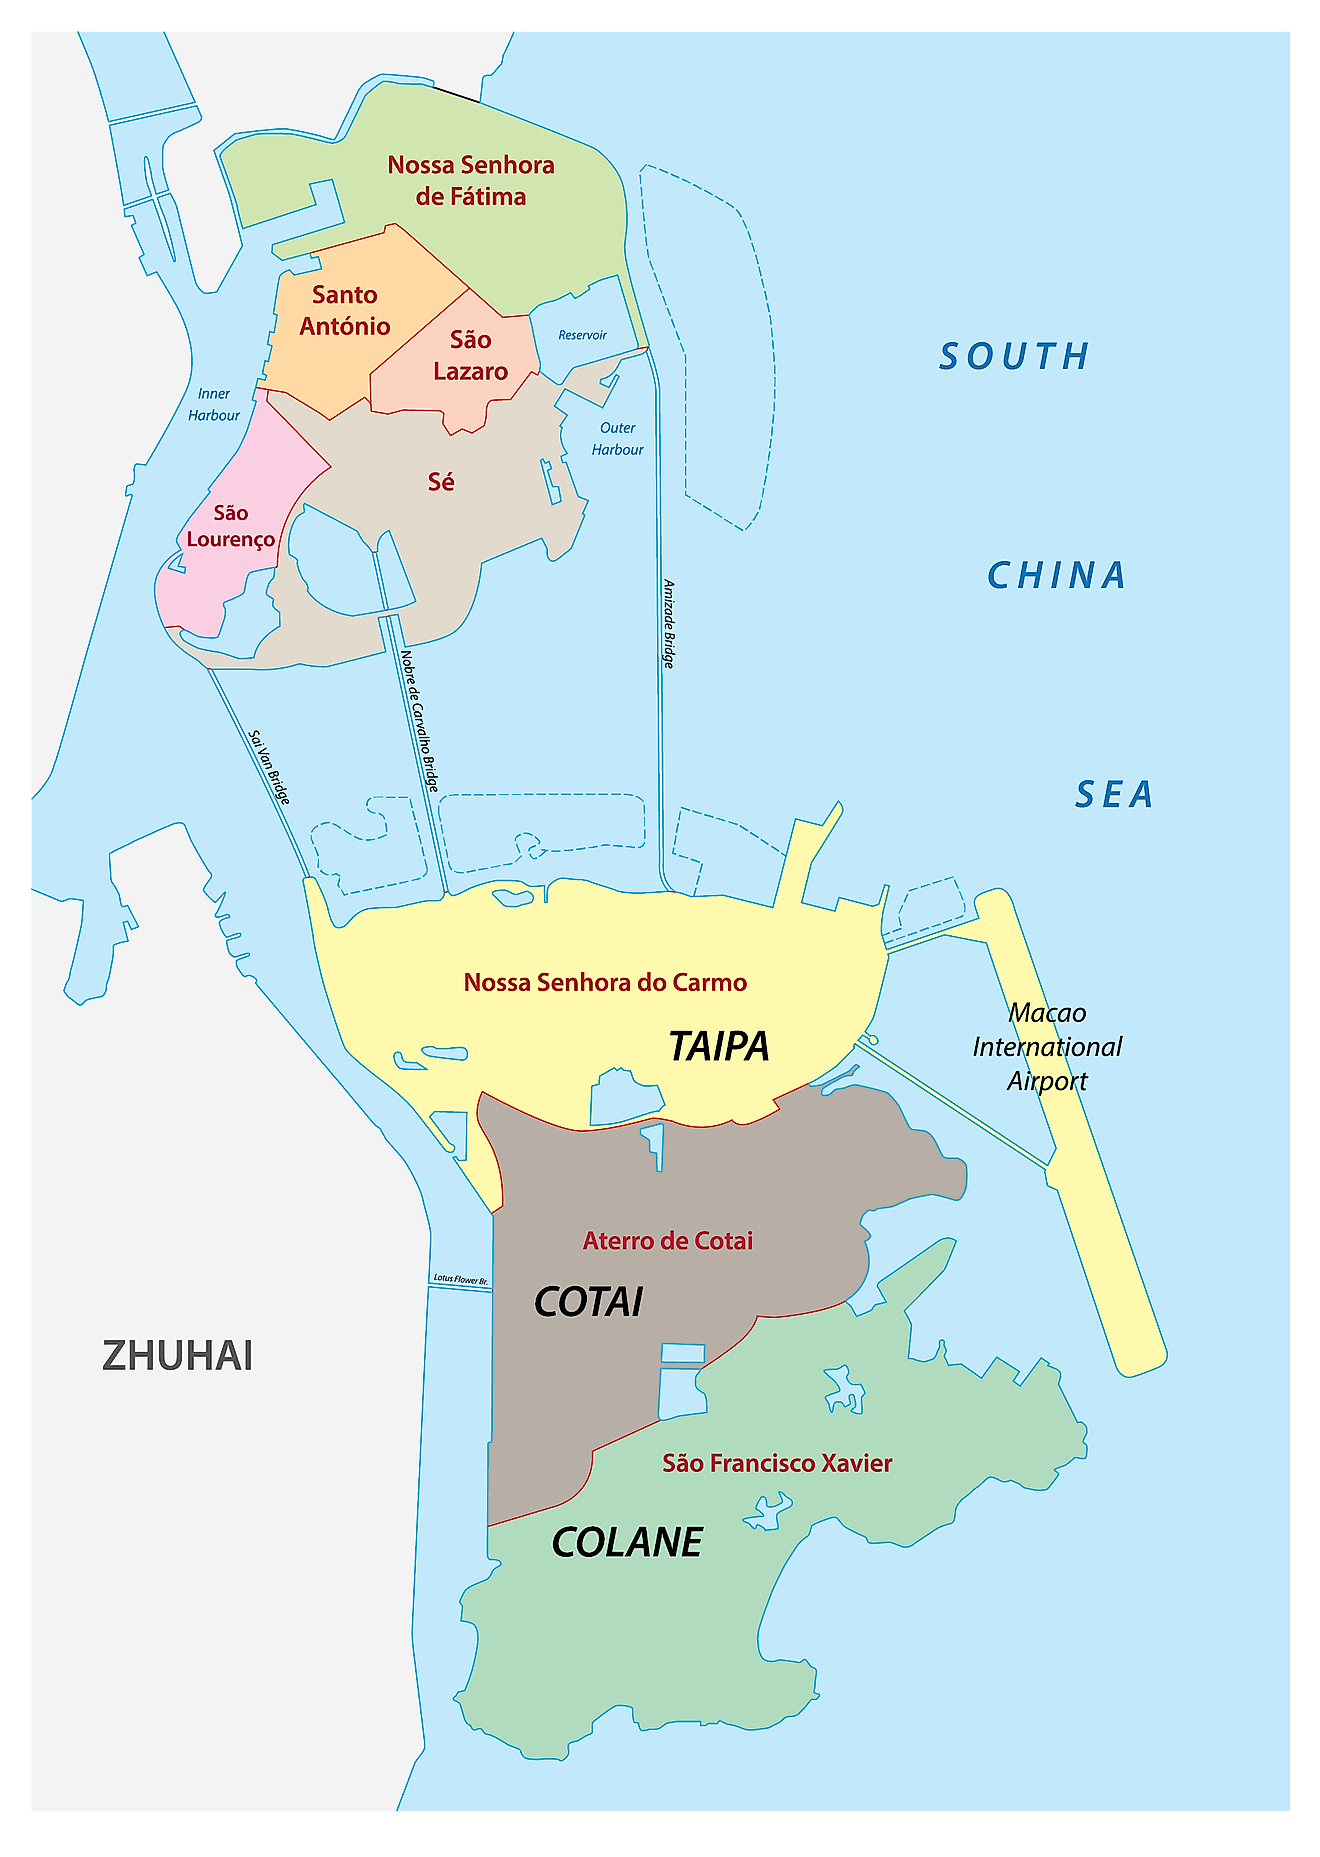 Political Map of Macau showing its 7 parishes and special territory of Cotai